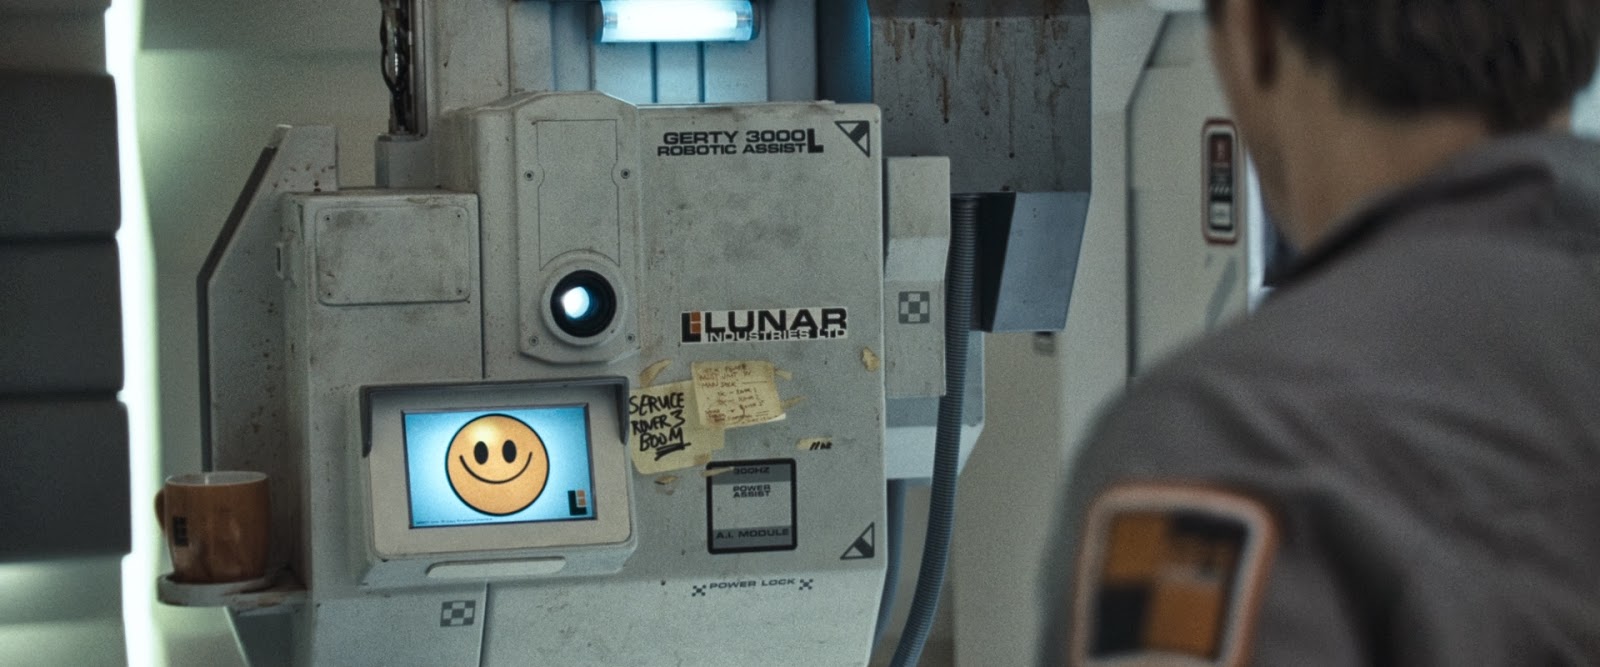 Depiction of the helpful AI “GERTY” from Moon (2009), directed by Duncan Jones